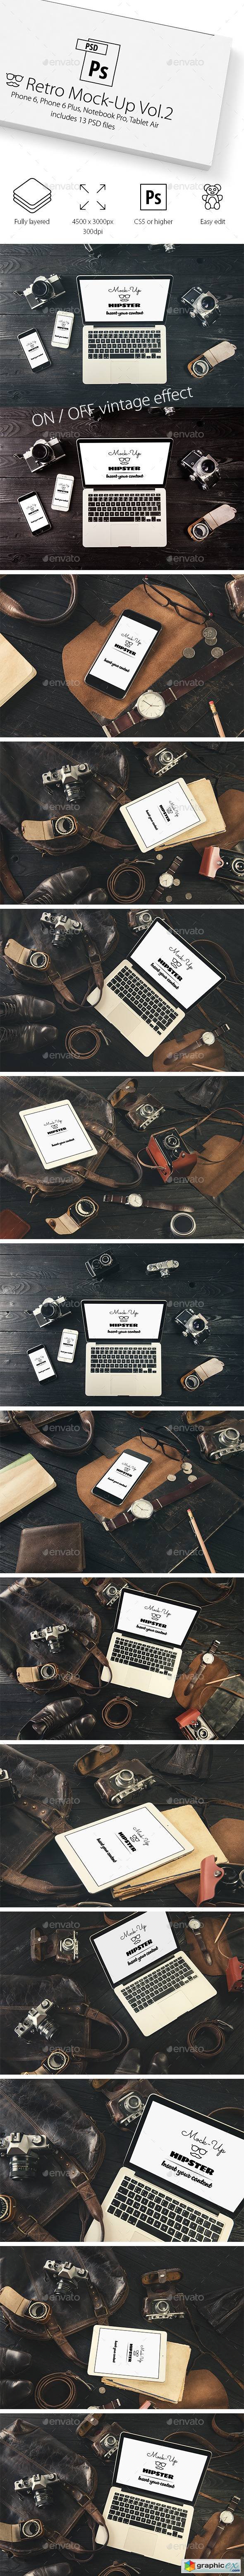 13 Devices Hipster Mock-Ups Vol2